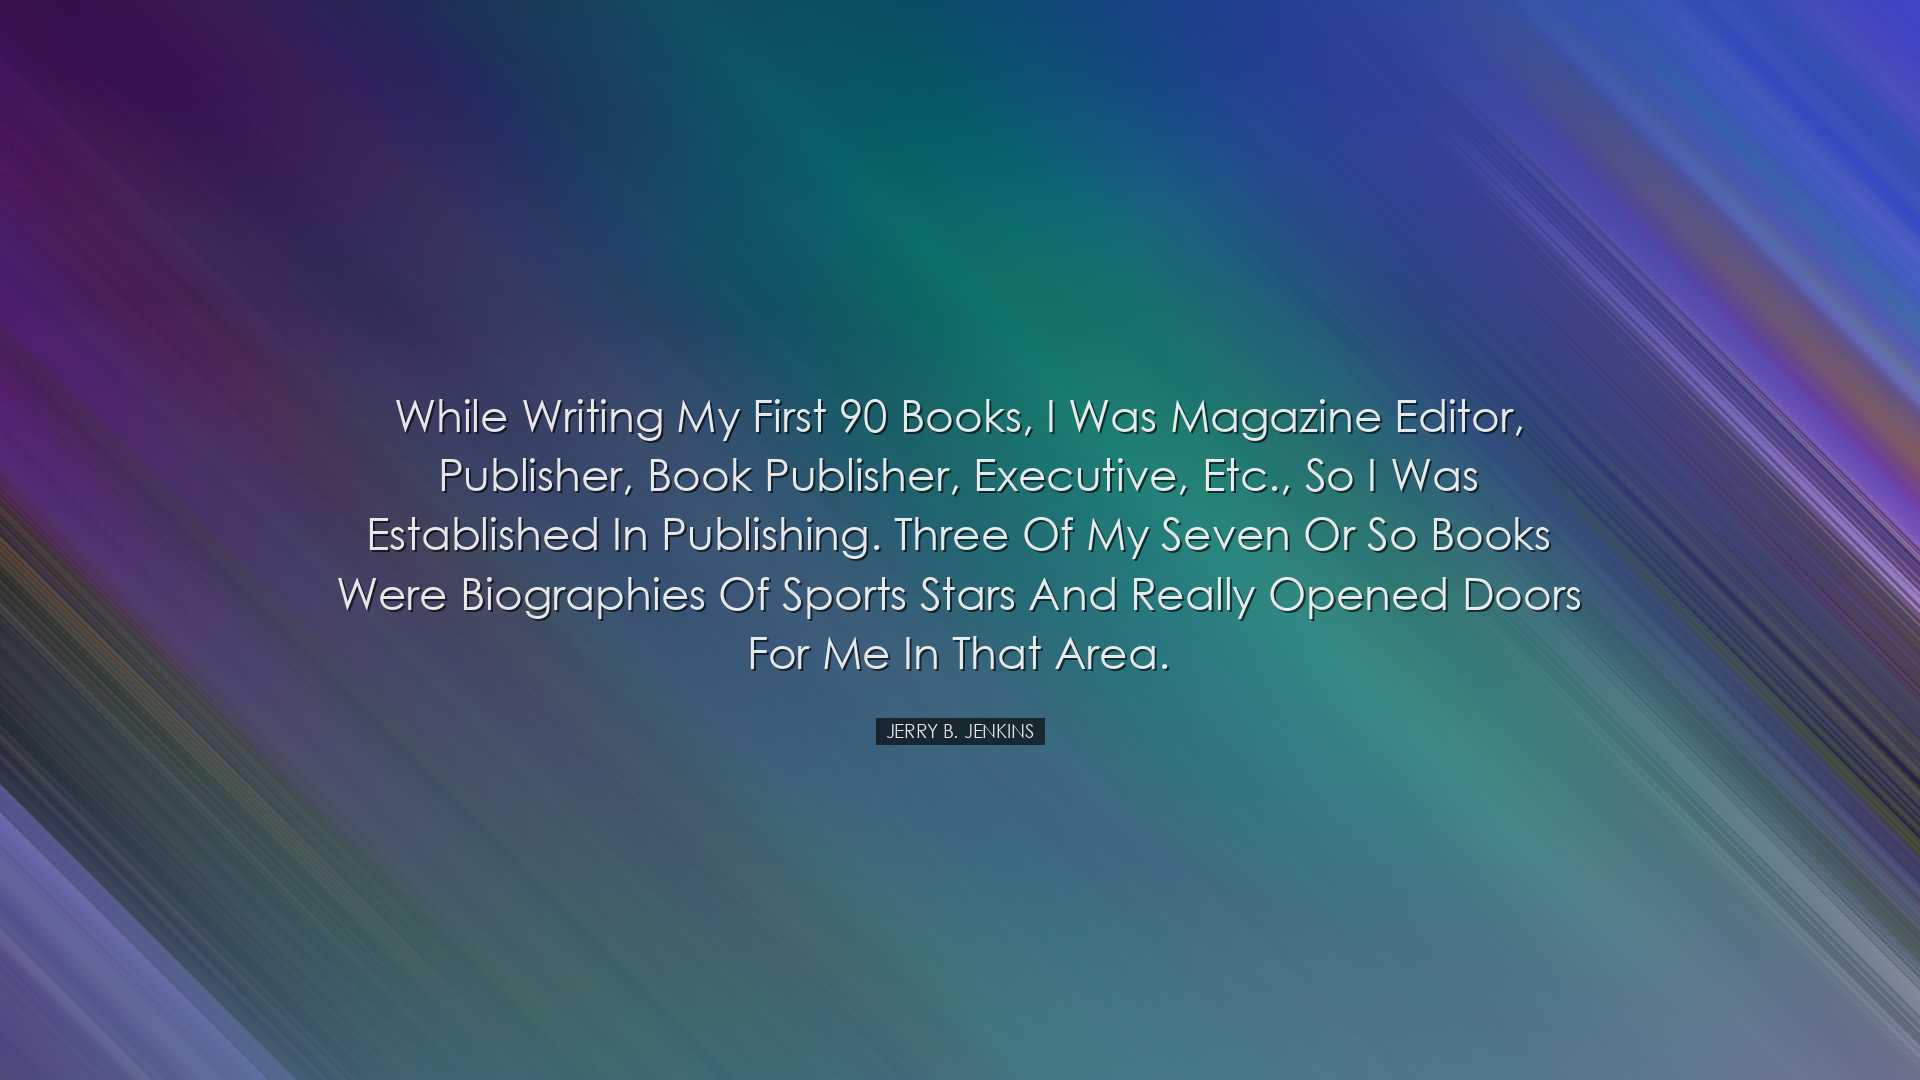 While writing my first 90 books, I was magazine editor, publisher,